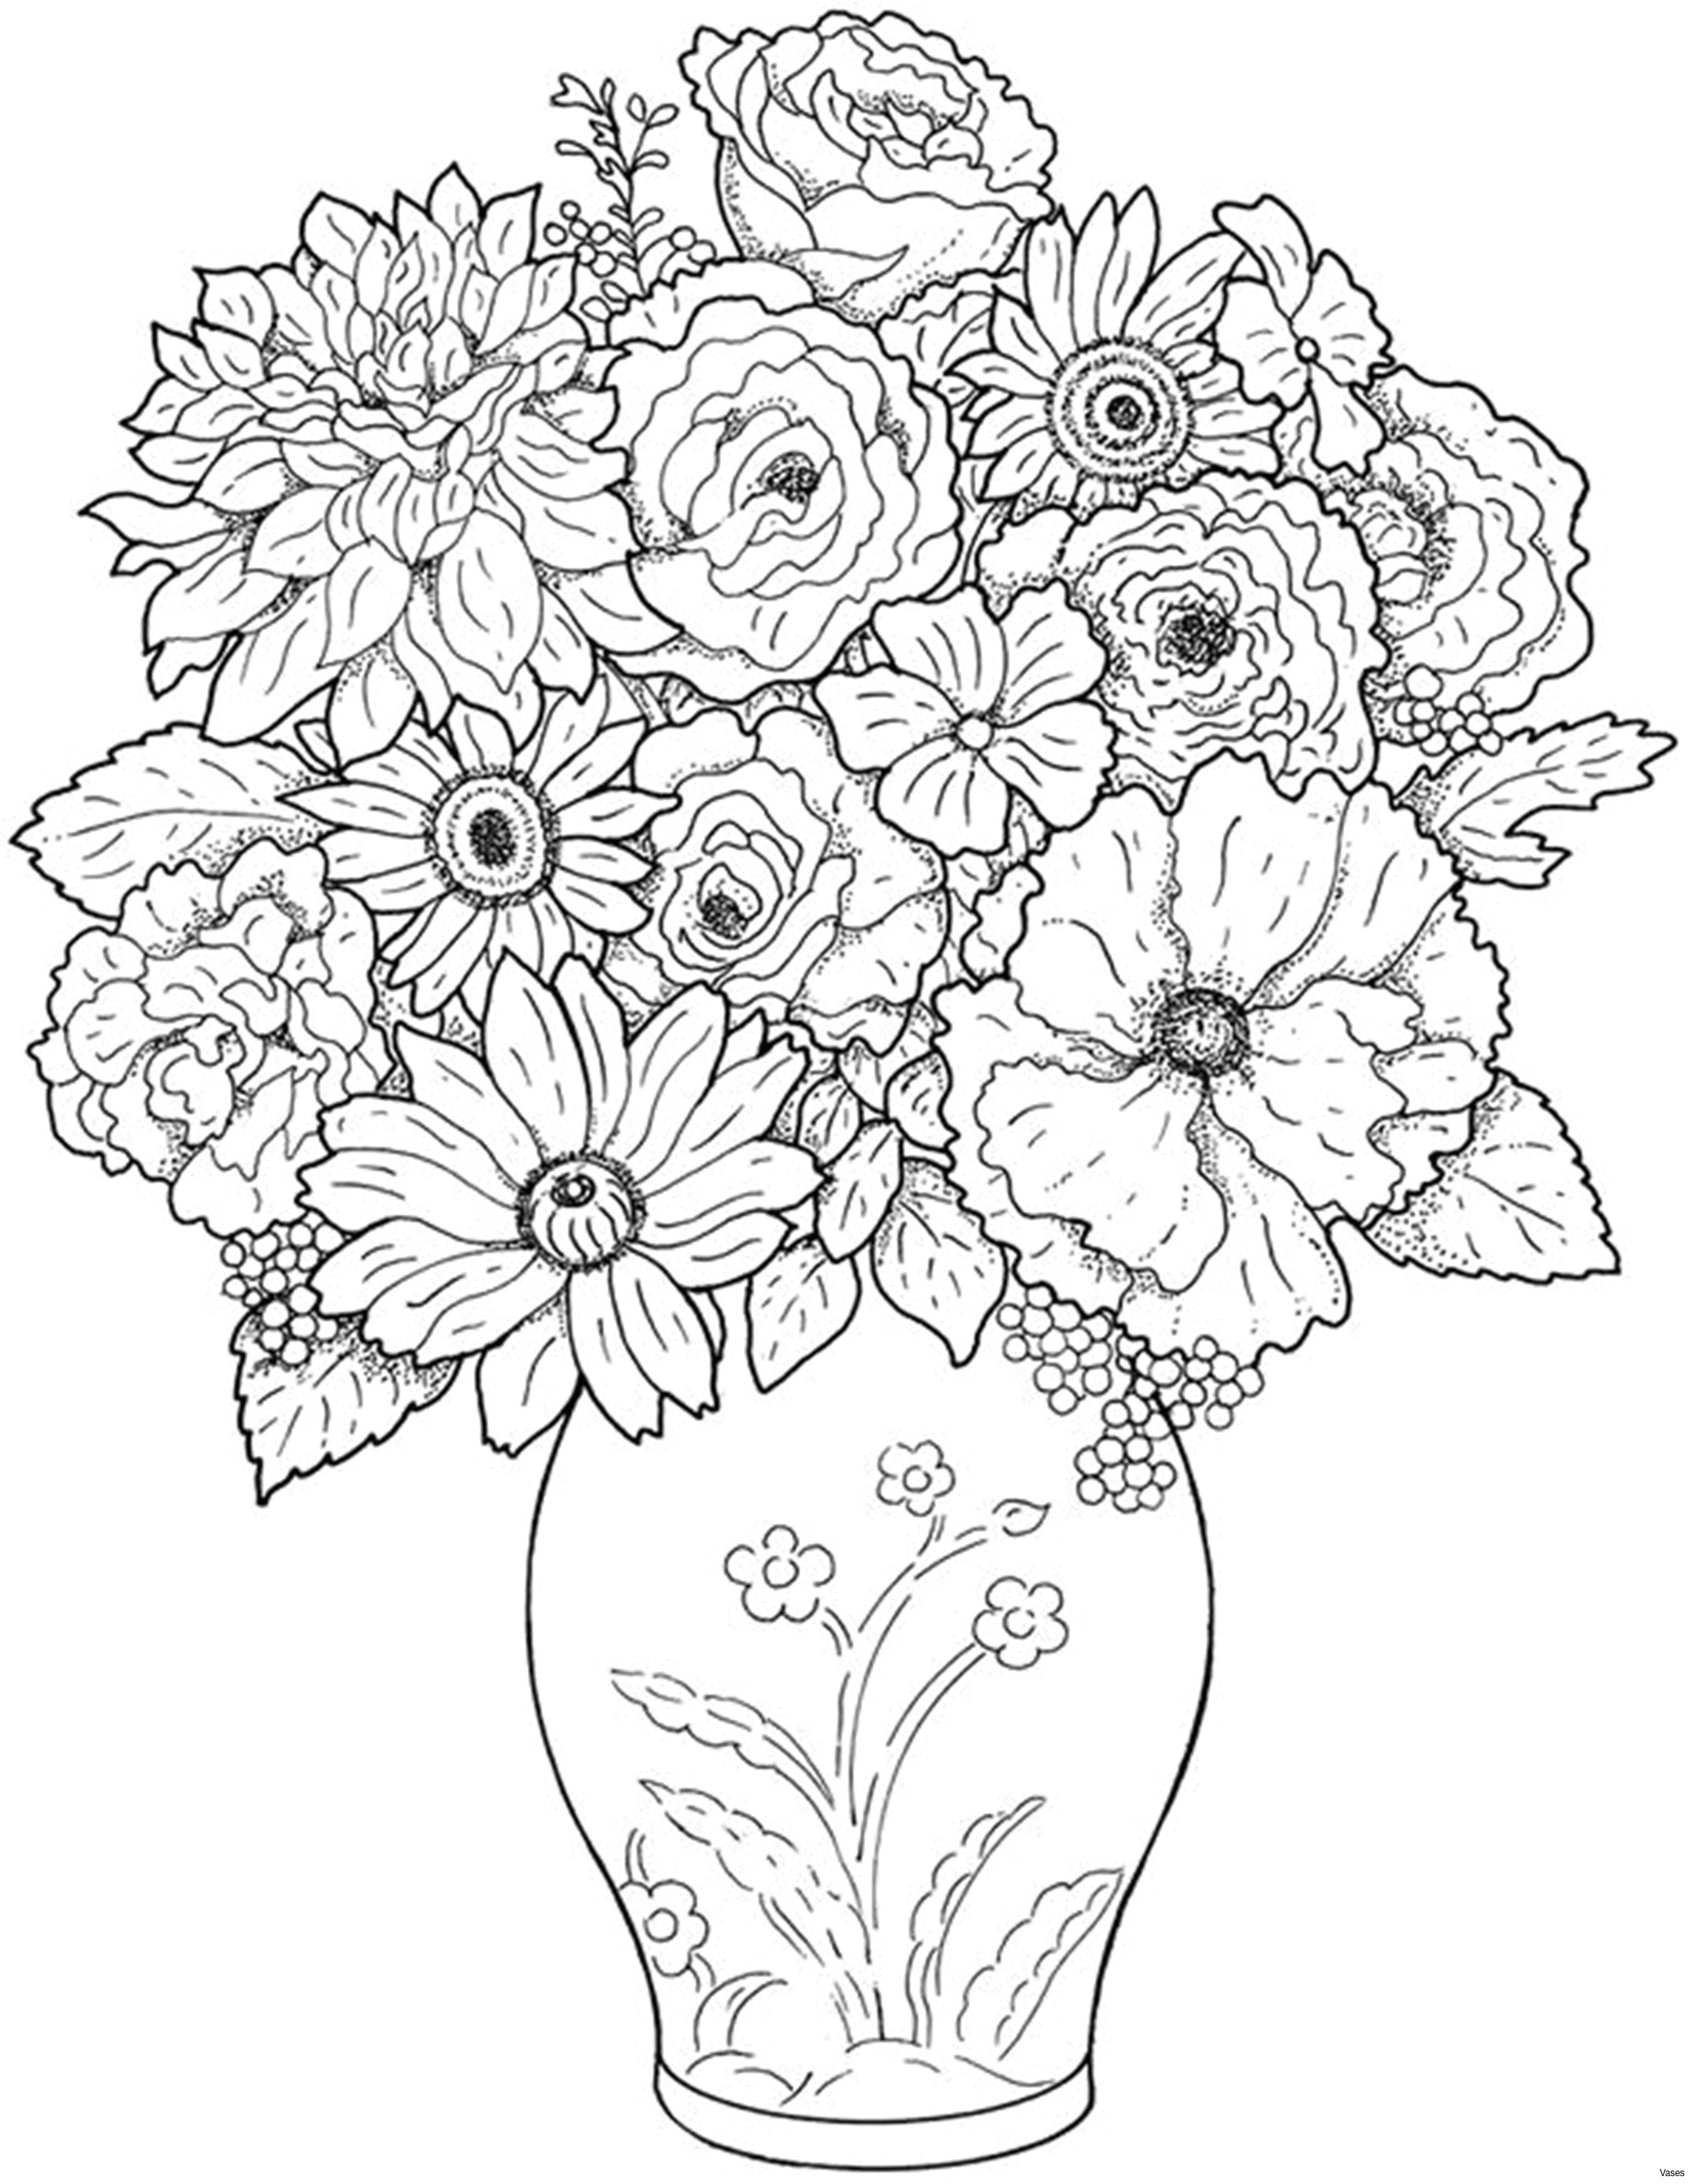 www colouring pages aua ergewohnliche cool vases flower vase coloring page pages flowers in a top